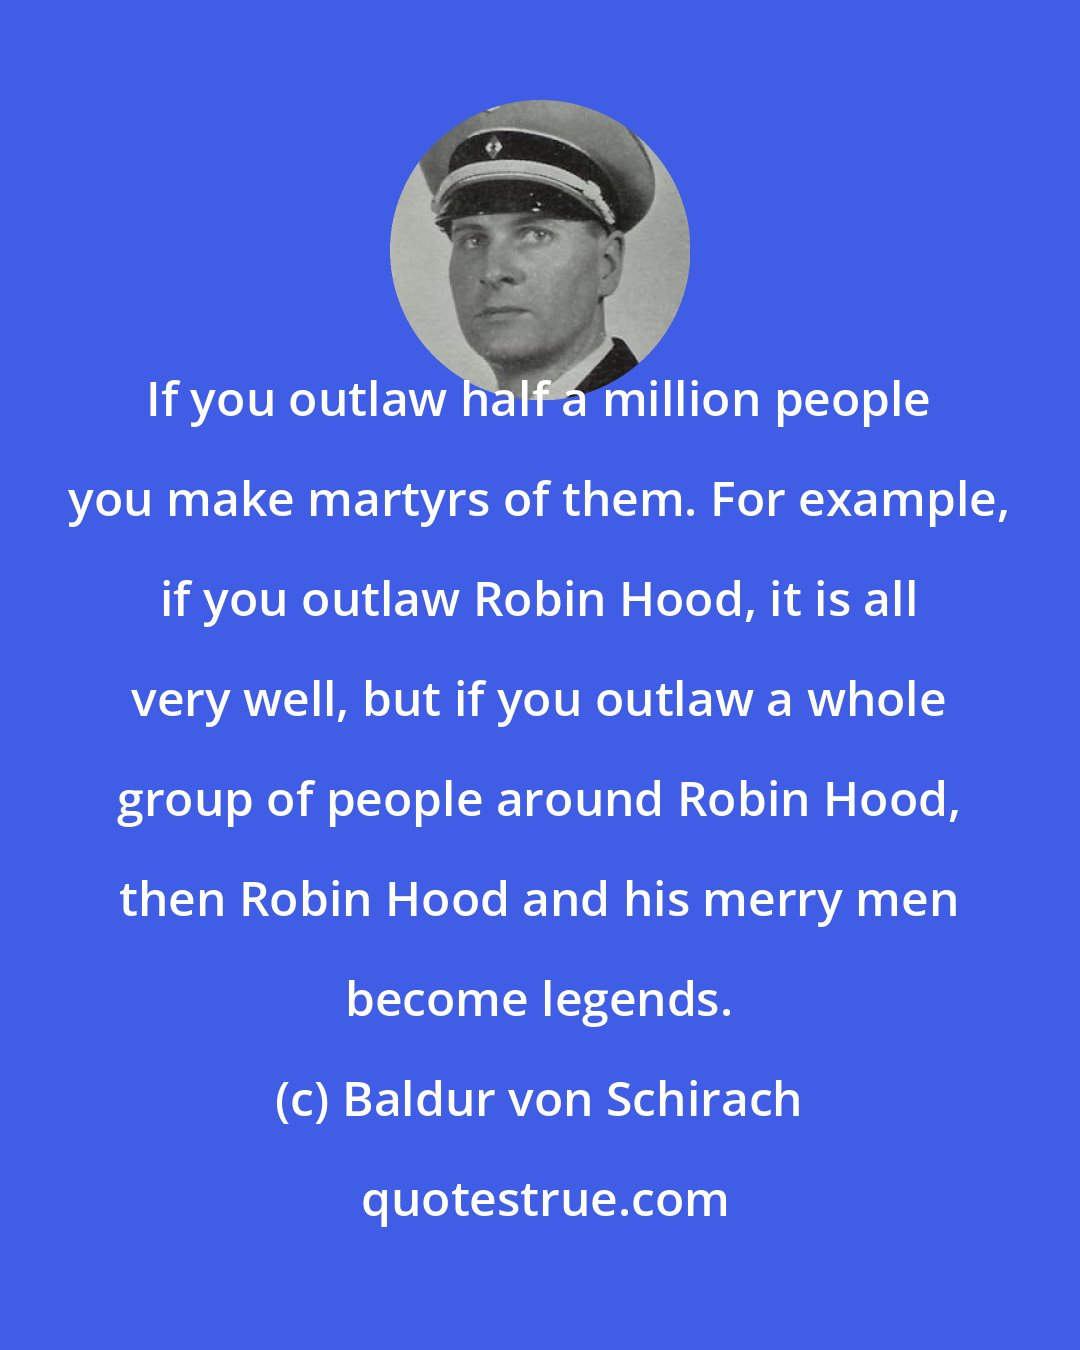 Baldur von Schirach: If you outlaw half a million people you make martyrs of them. For example, if you outlaw Robin Hood, it is all very well, but if you outlaw a whole group of people around Robin Hood, then Robin Hood and his merry men become legends.